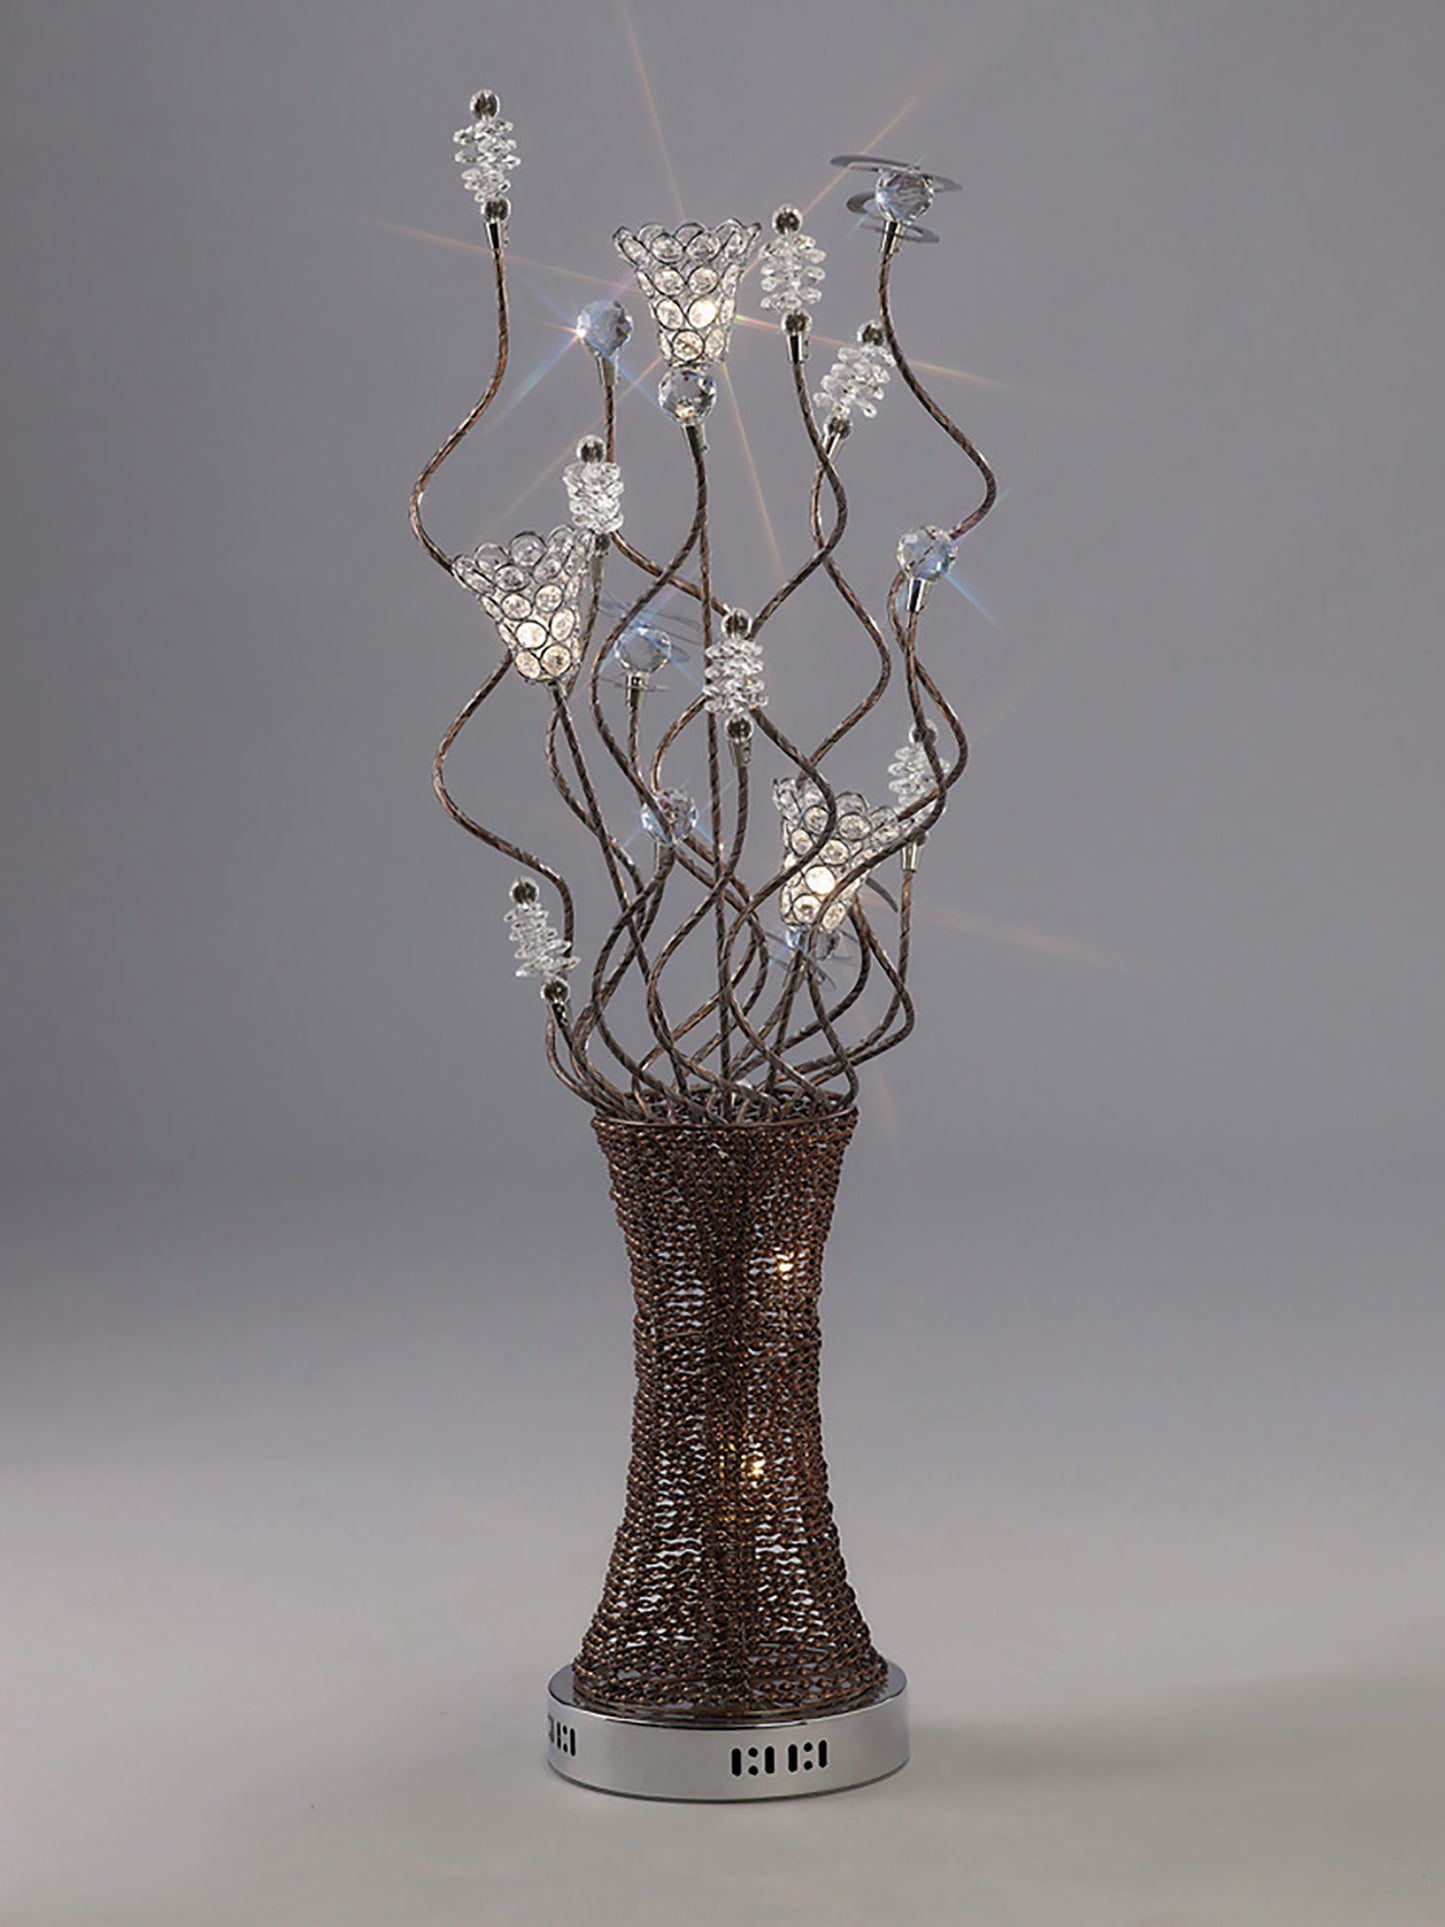 Kristal Crystal Flower Table Lamp by Cassia Twigue